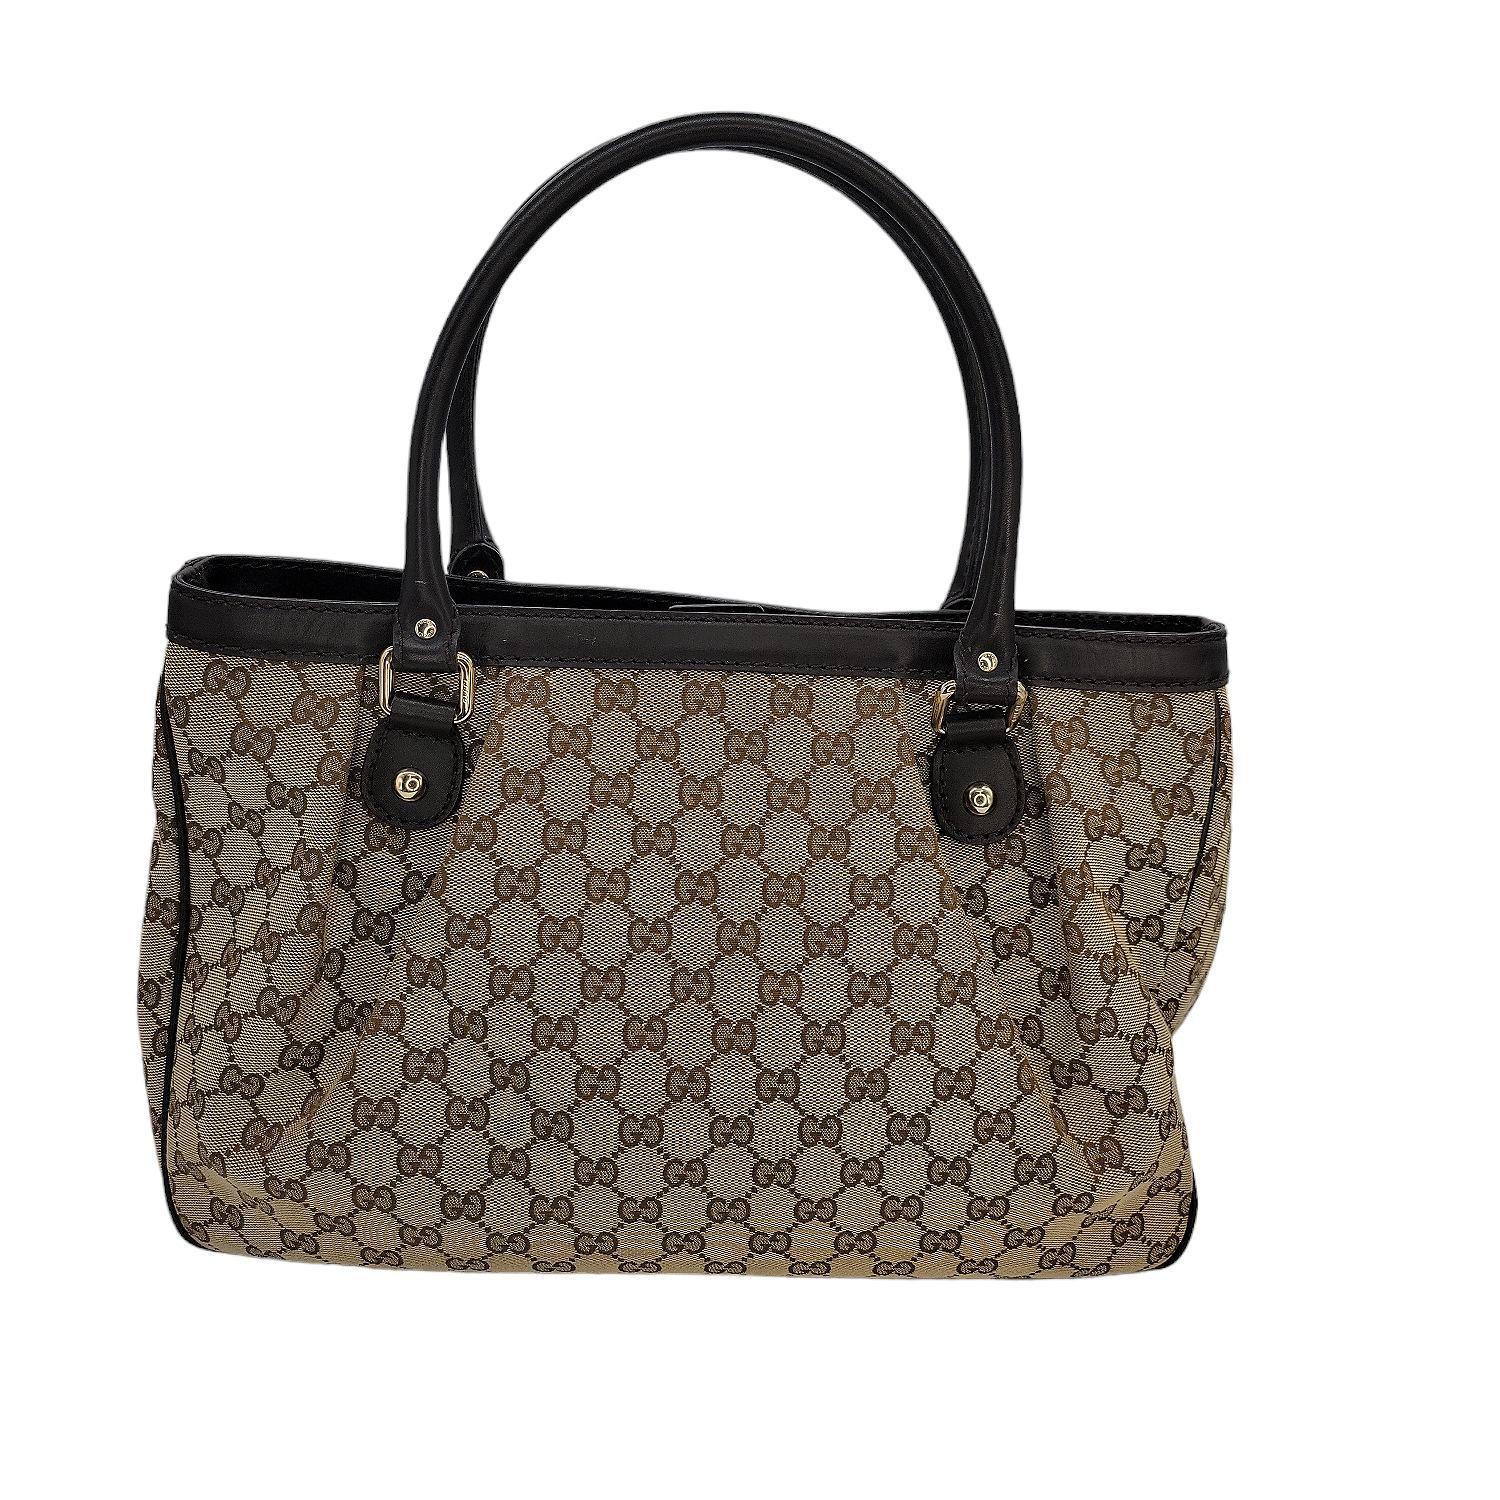 This popular and affordable Gucci GG Canvas Sukey Bag features a chic tote design with leather handles, zipper center compartment closure, as well as a fold-over leather strap, w/ magnetic snap. This bag is made of durable GG canvas. Its roomy